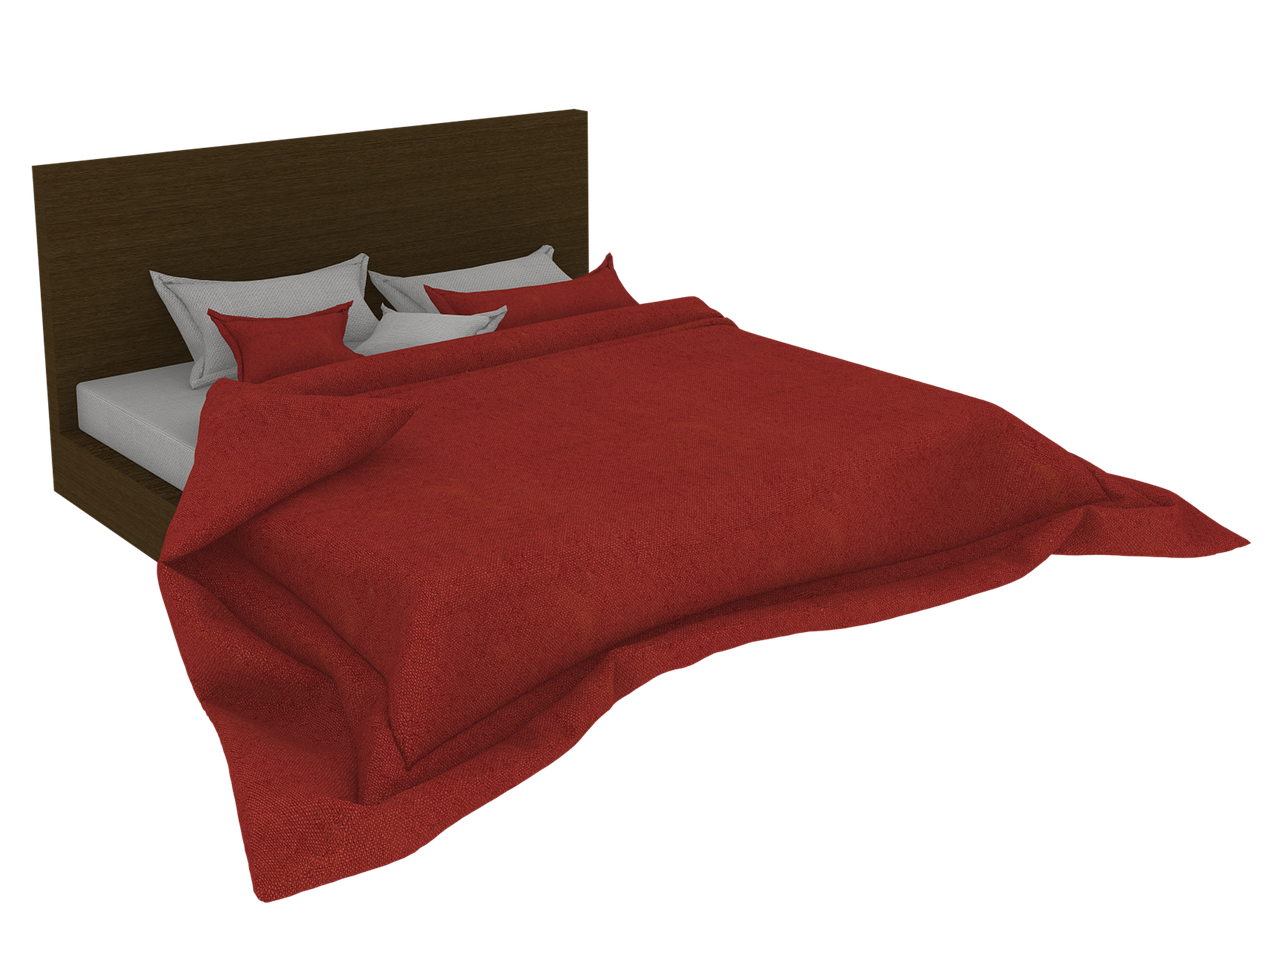 bed 3d render free photo